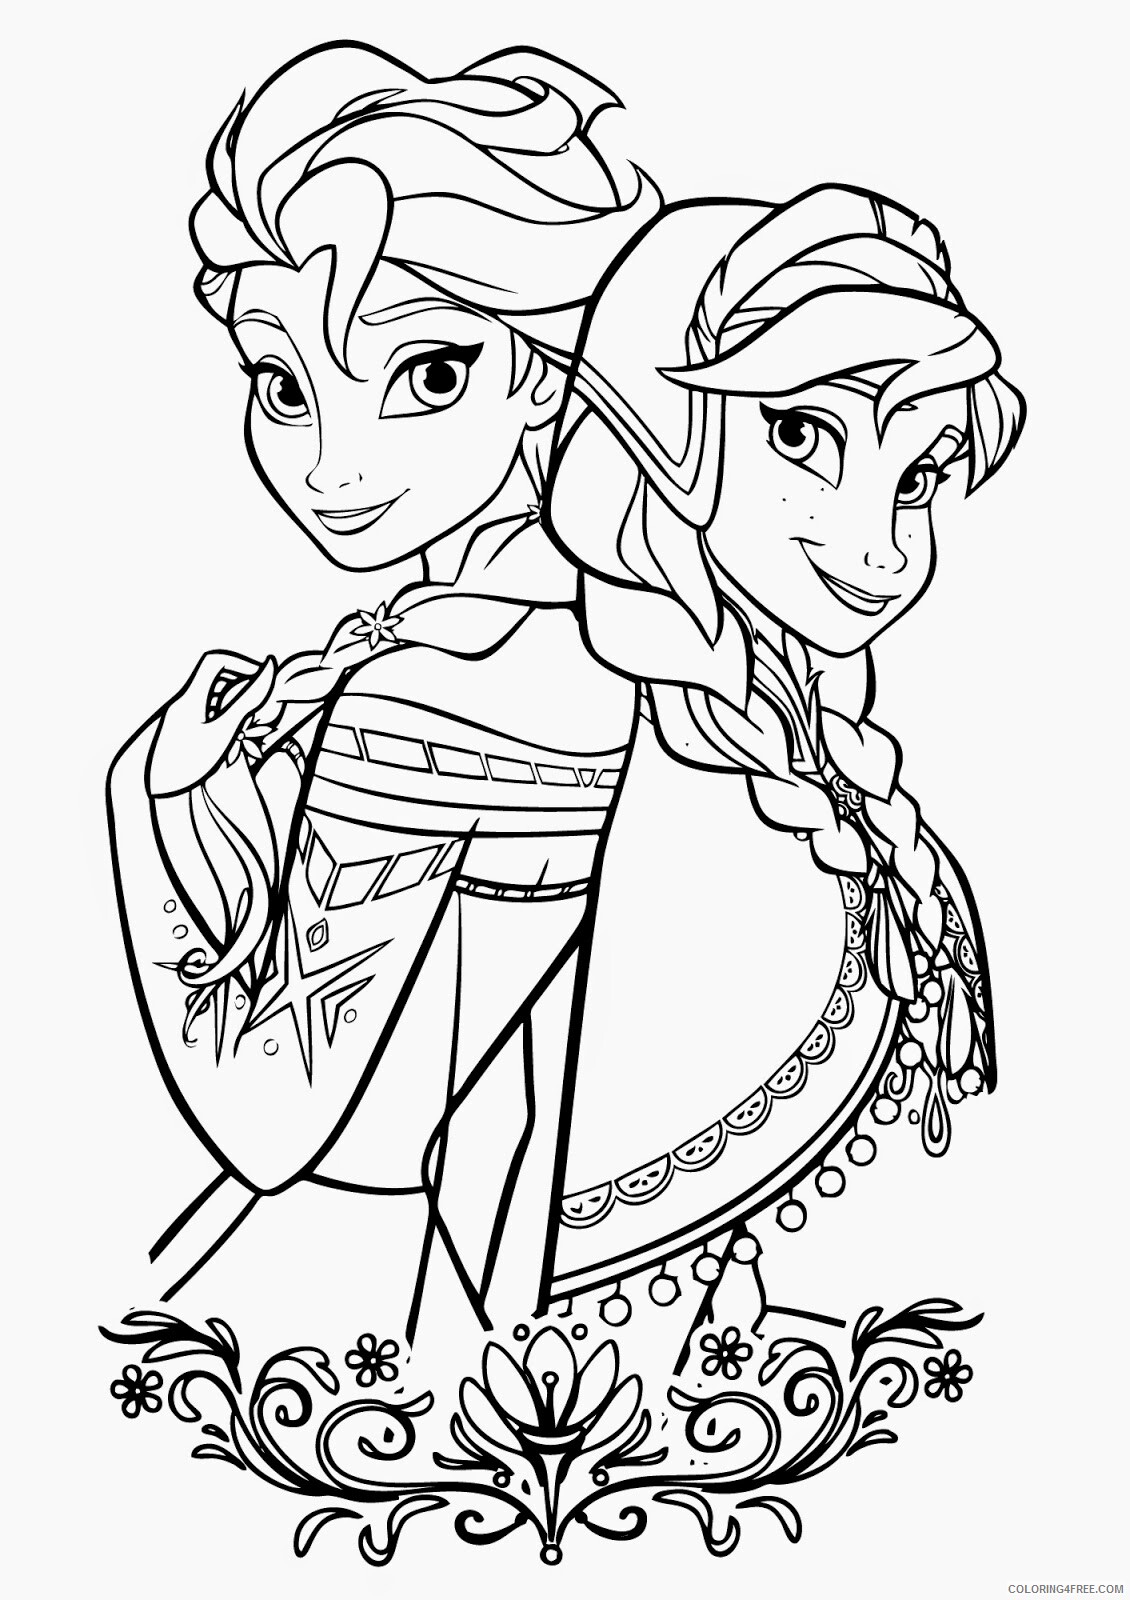 Elsa Coloring Pages Printable Elsa and Anna Printable 2021 2136 Coloring4free